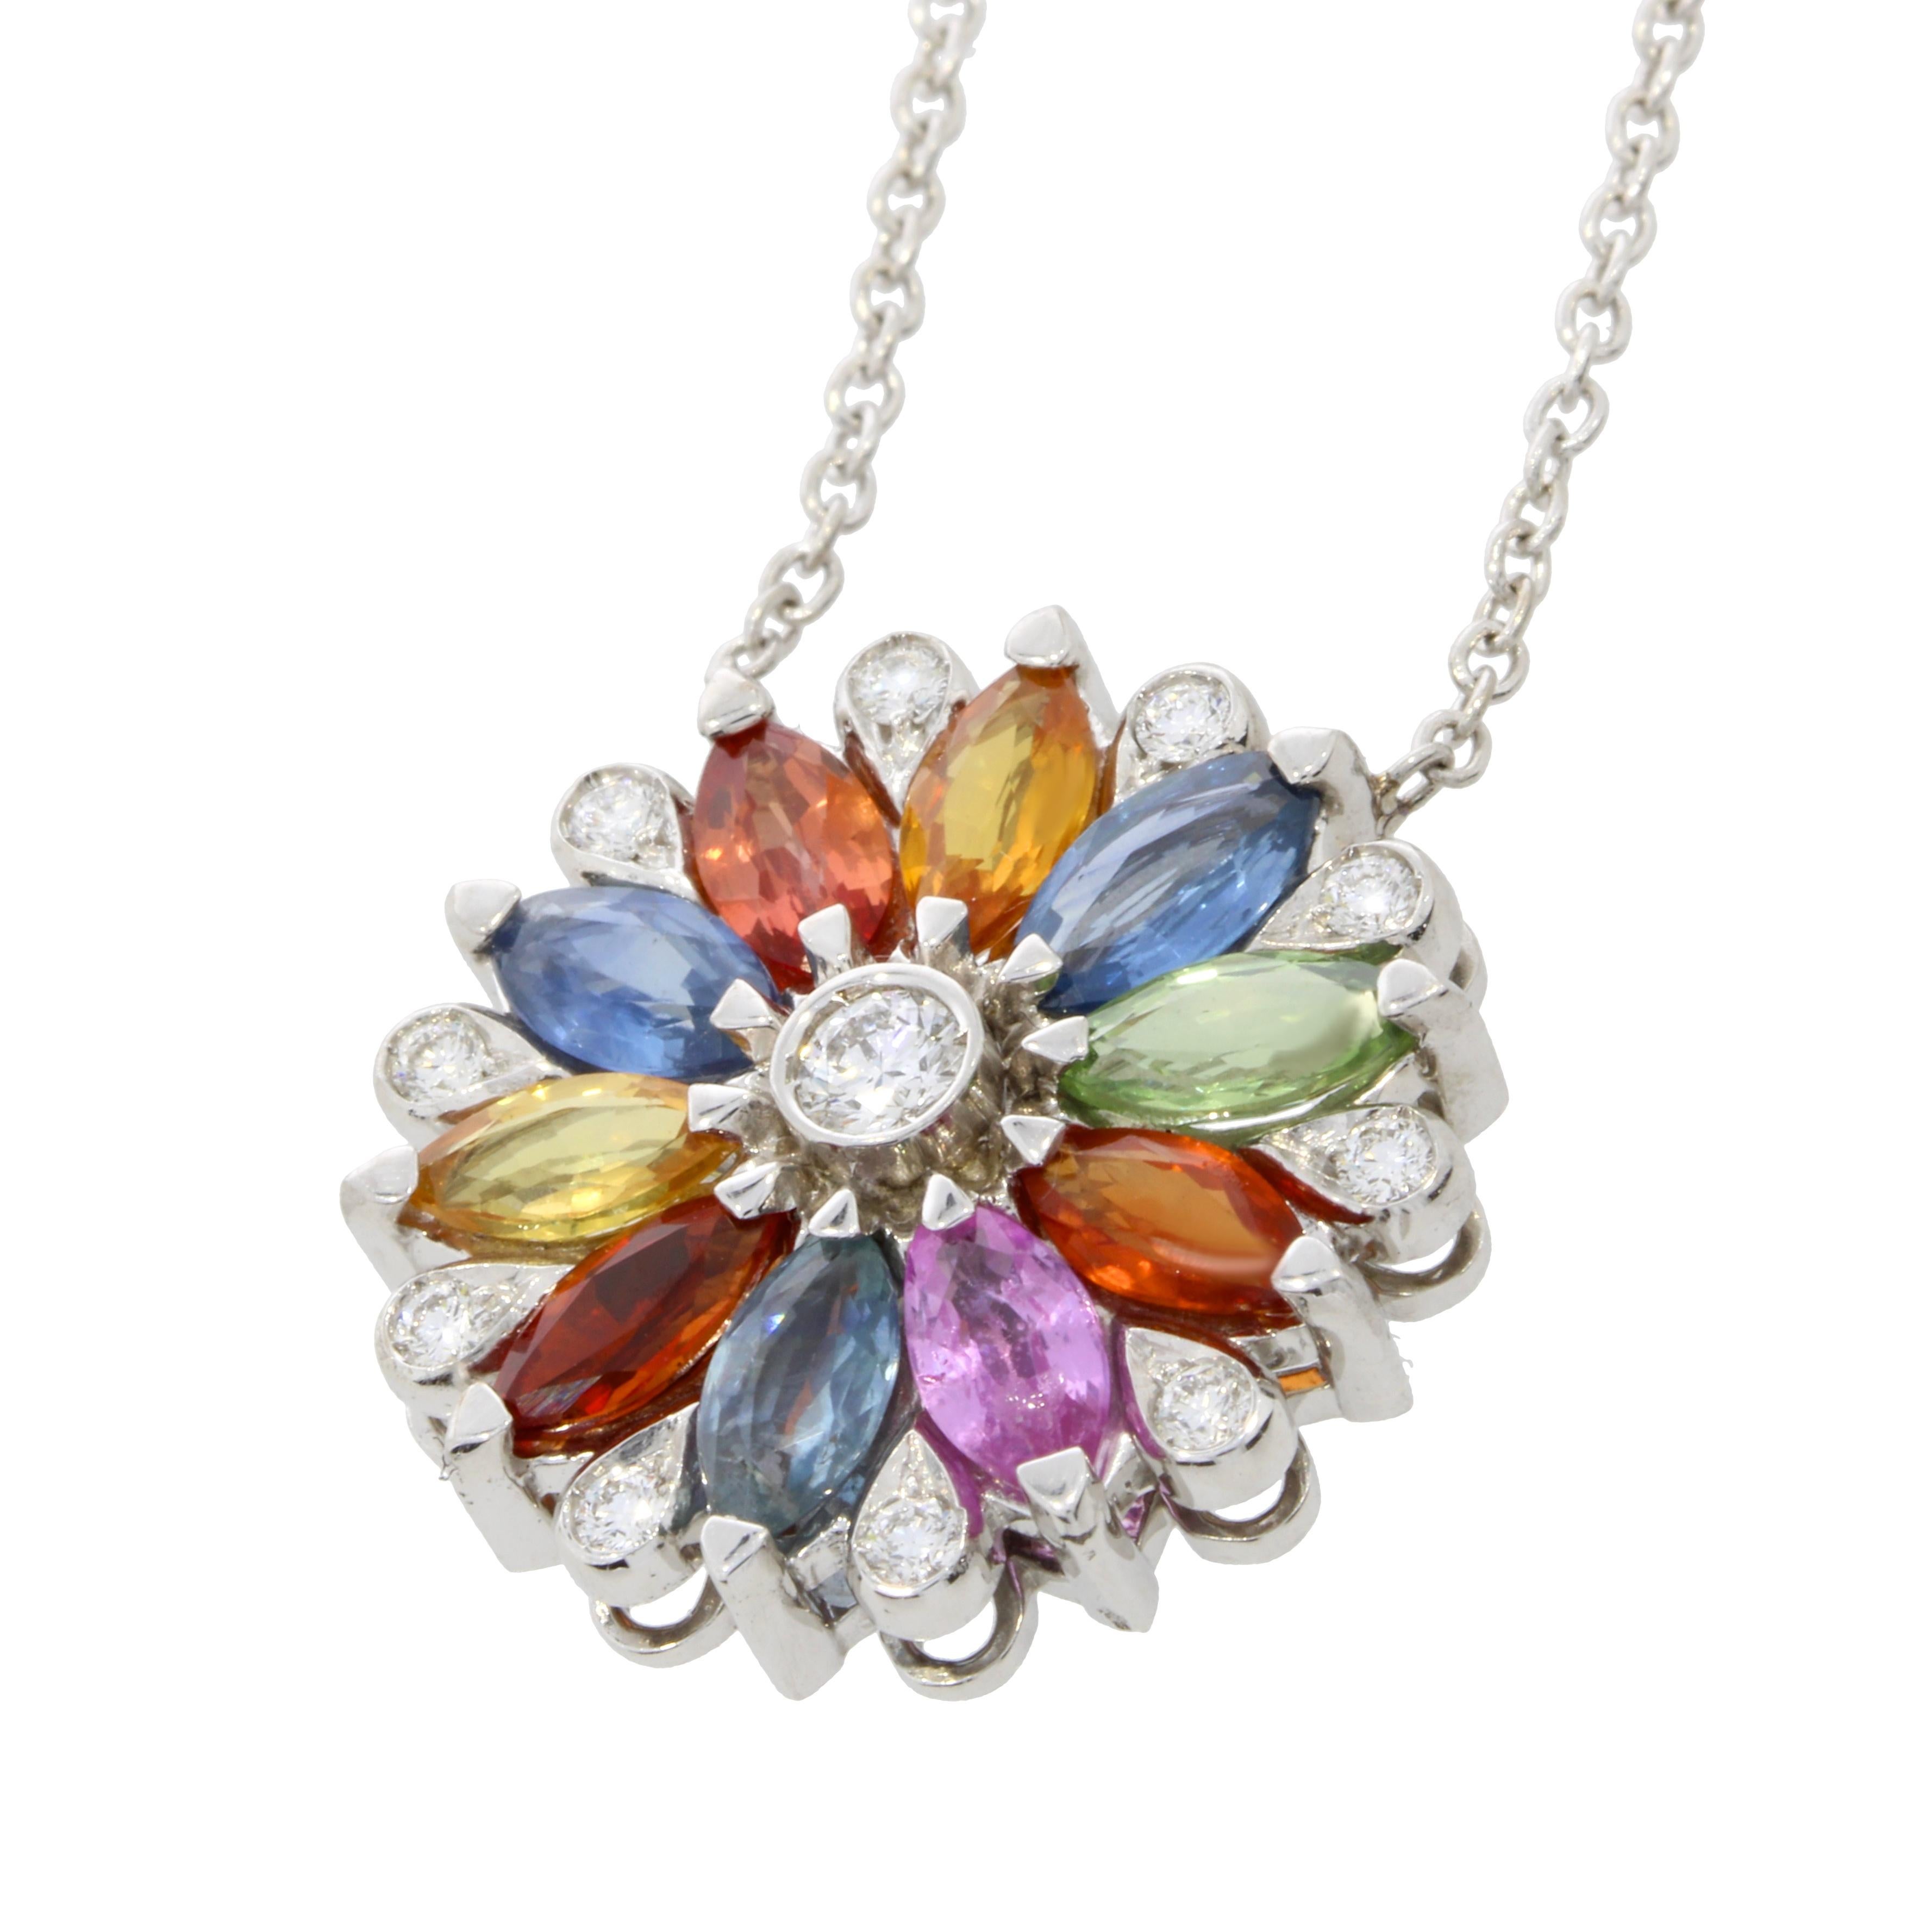 An elegant wreath of petals suspended on a delicate chain is bought to life with captivating marquise cut multi-coloured sapphires surrounded by brilliant cut diamonds and a central Diamond.

Multicoloured Sapphires Dalia Small Pendant
18 karat